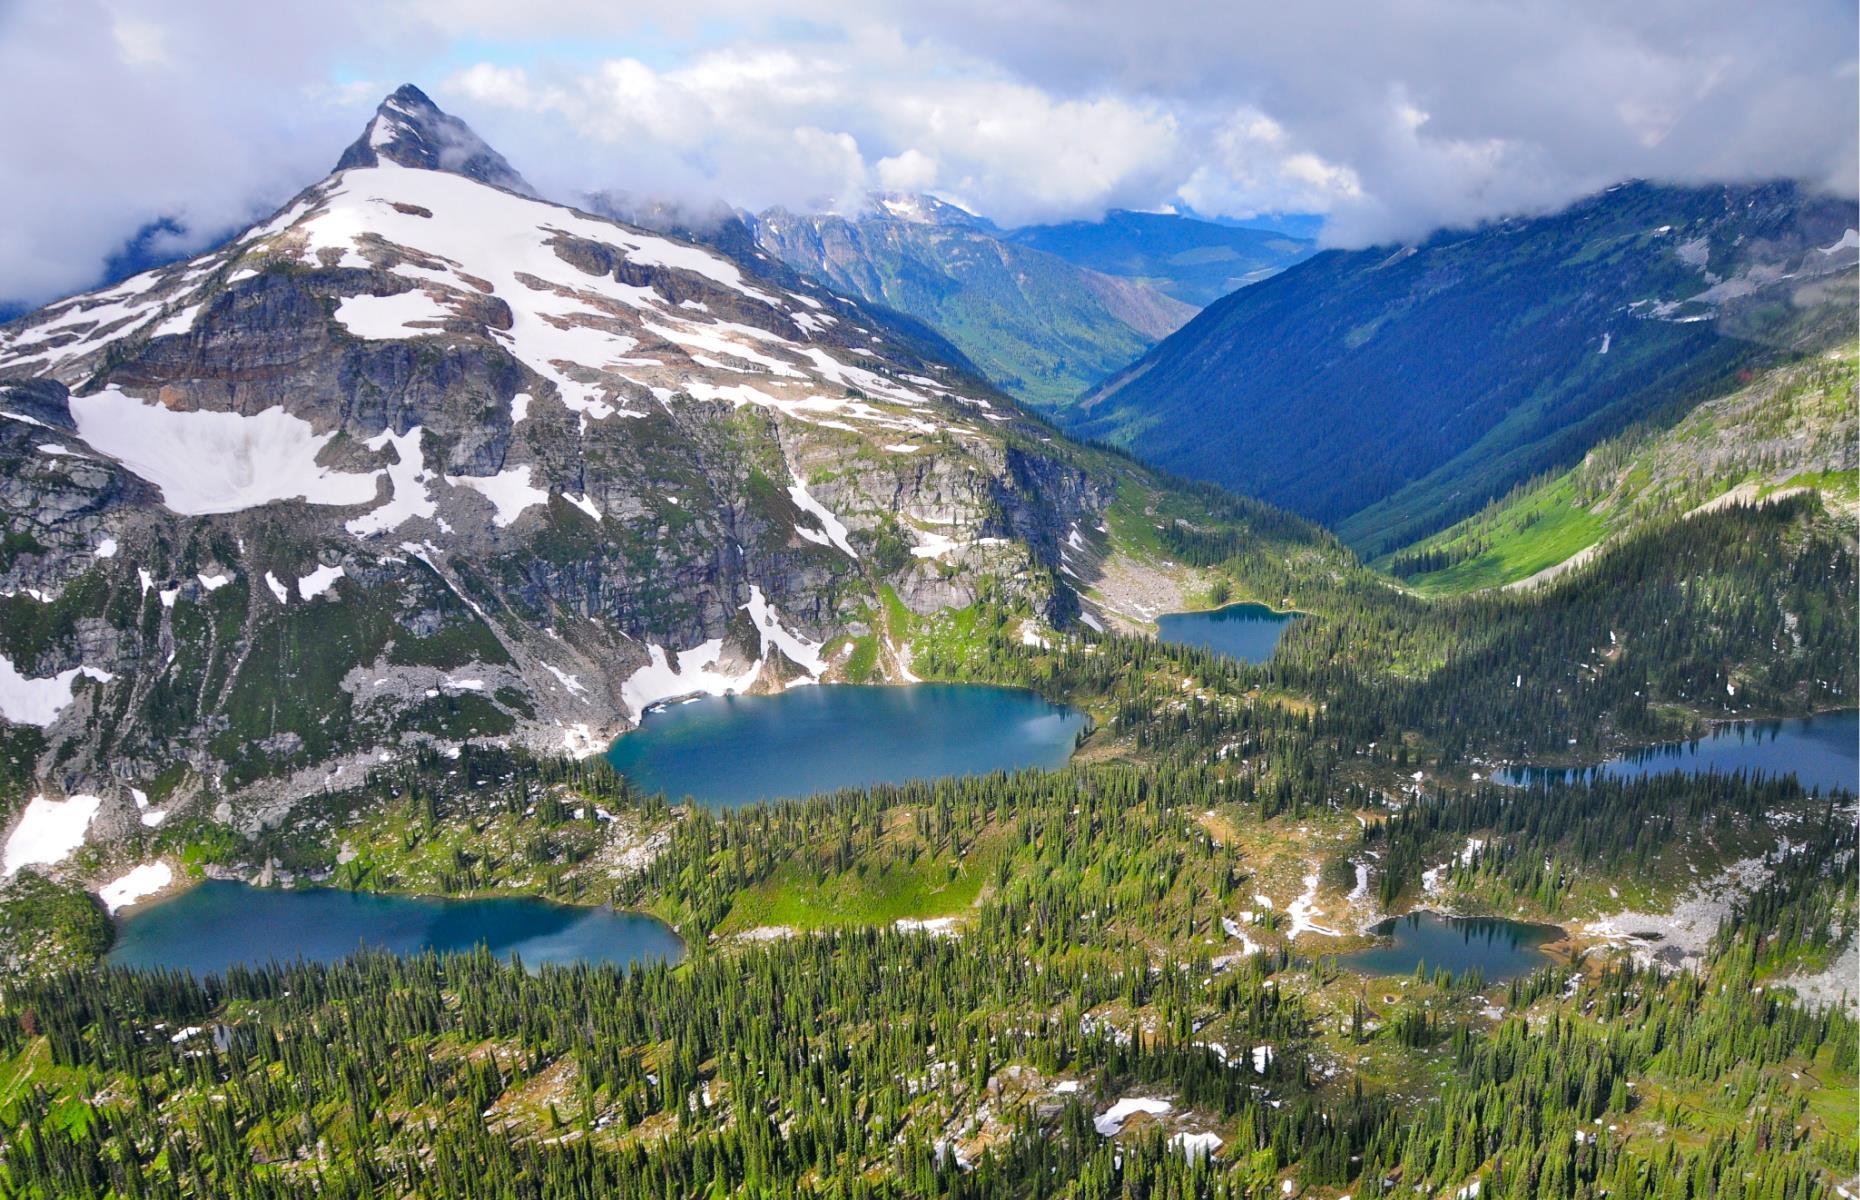 Canada’s most beautiful national parks are fiercely protected